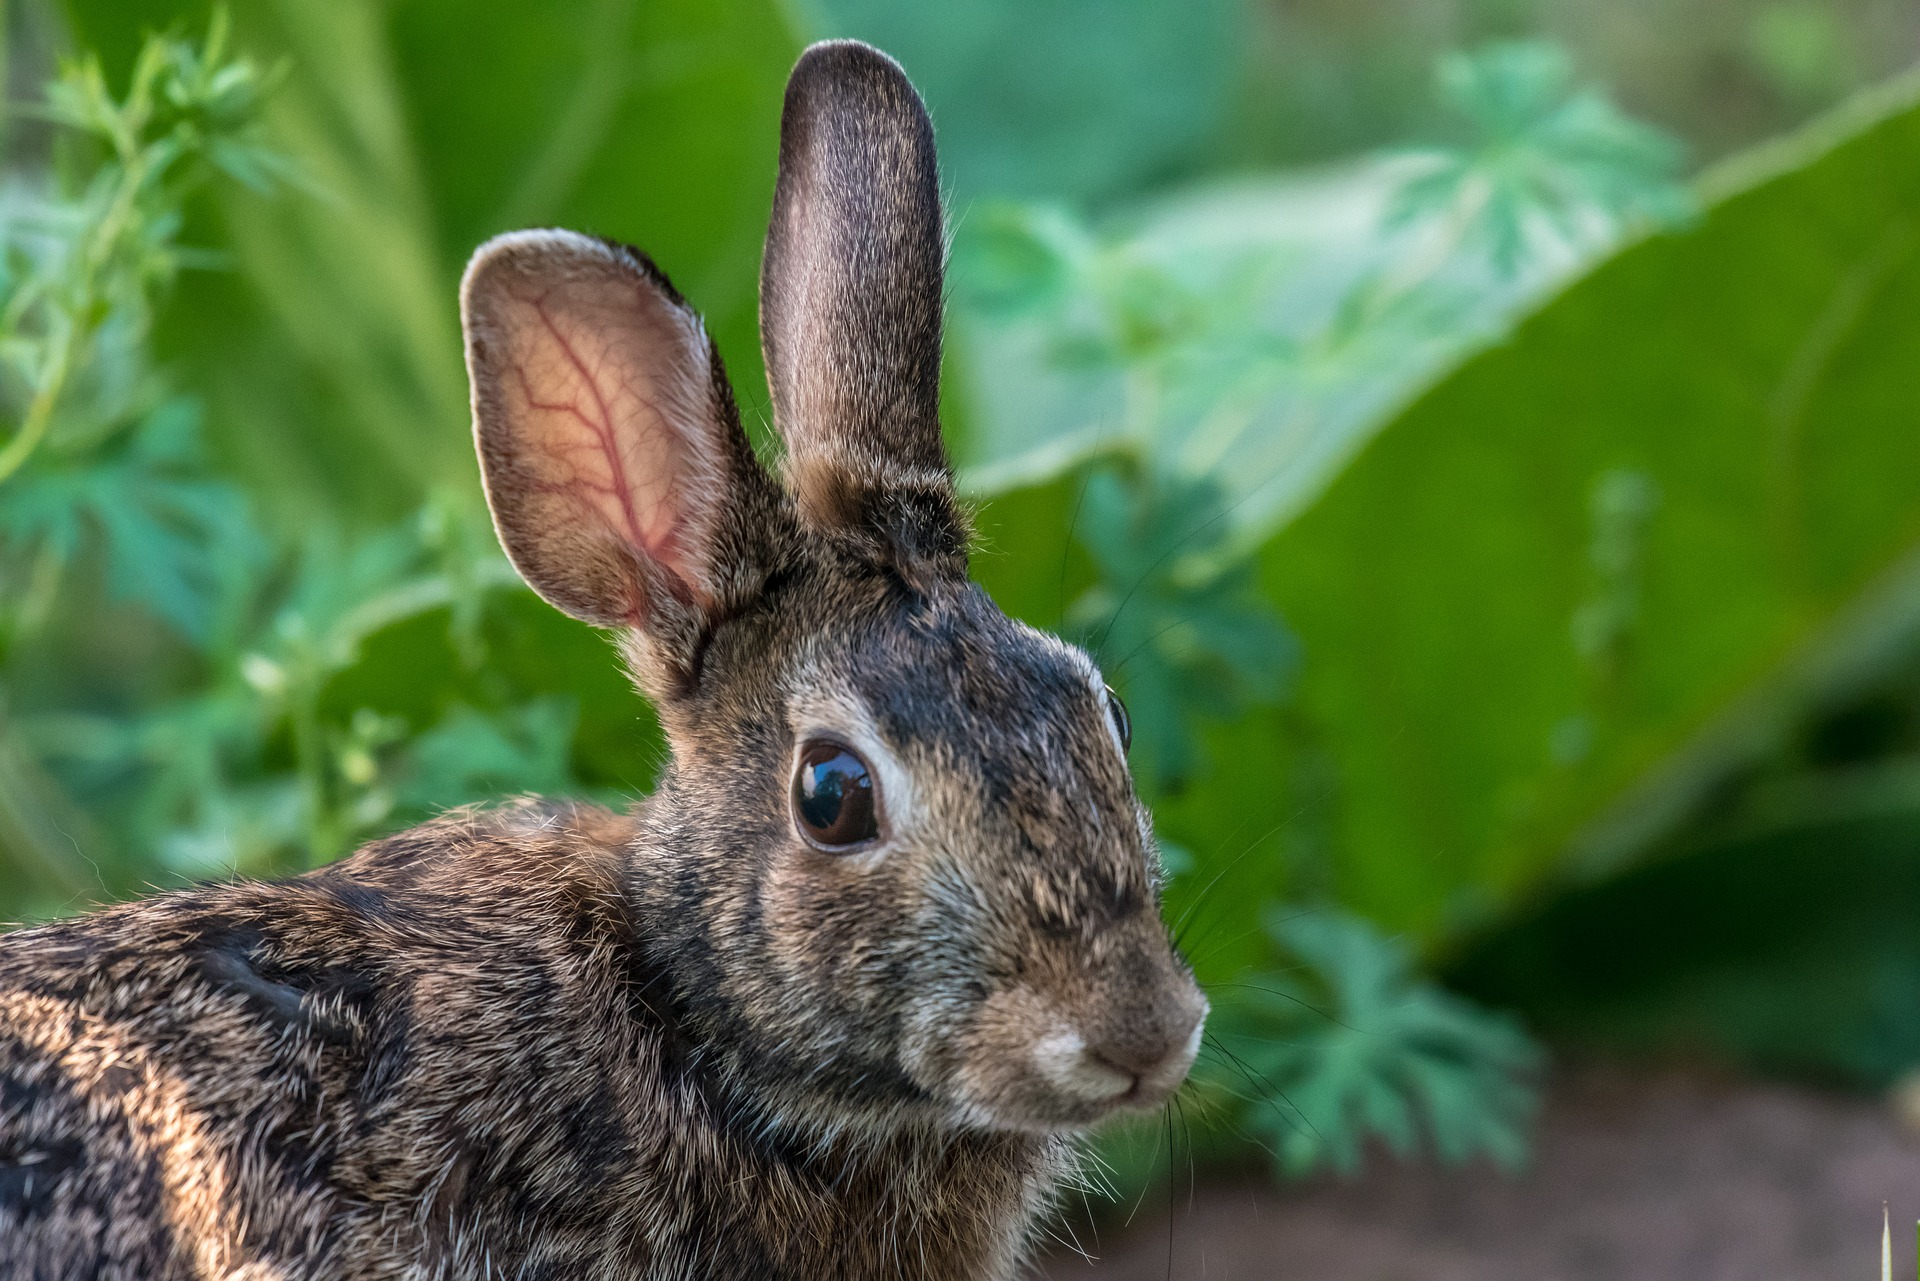 Rabbits are cute until they get into your garden. Thankfully there are several ways to keep rabbits out of your garden naturally.